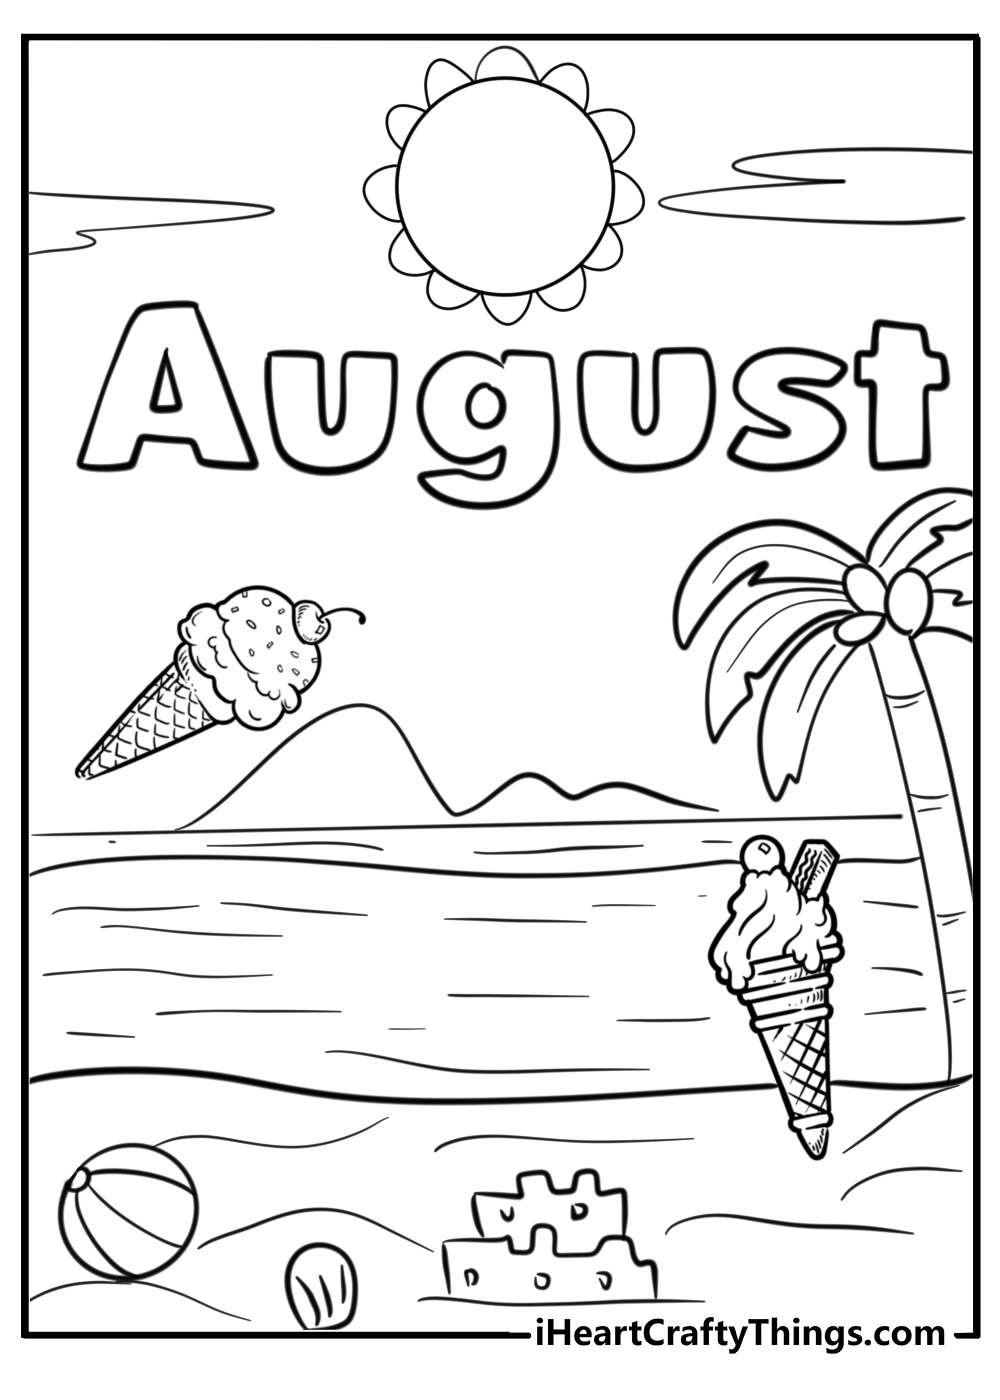 Printable august coloring page